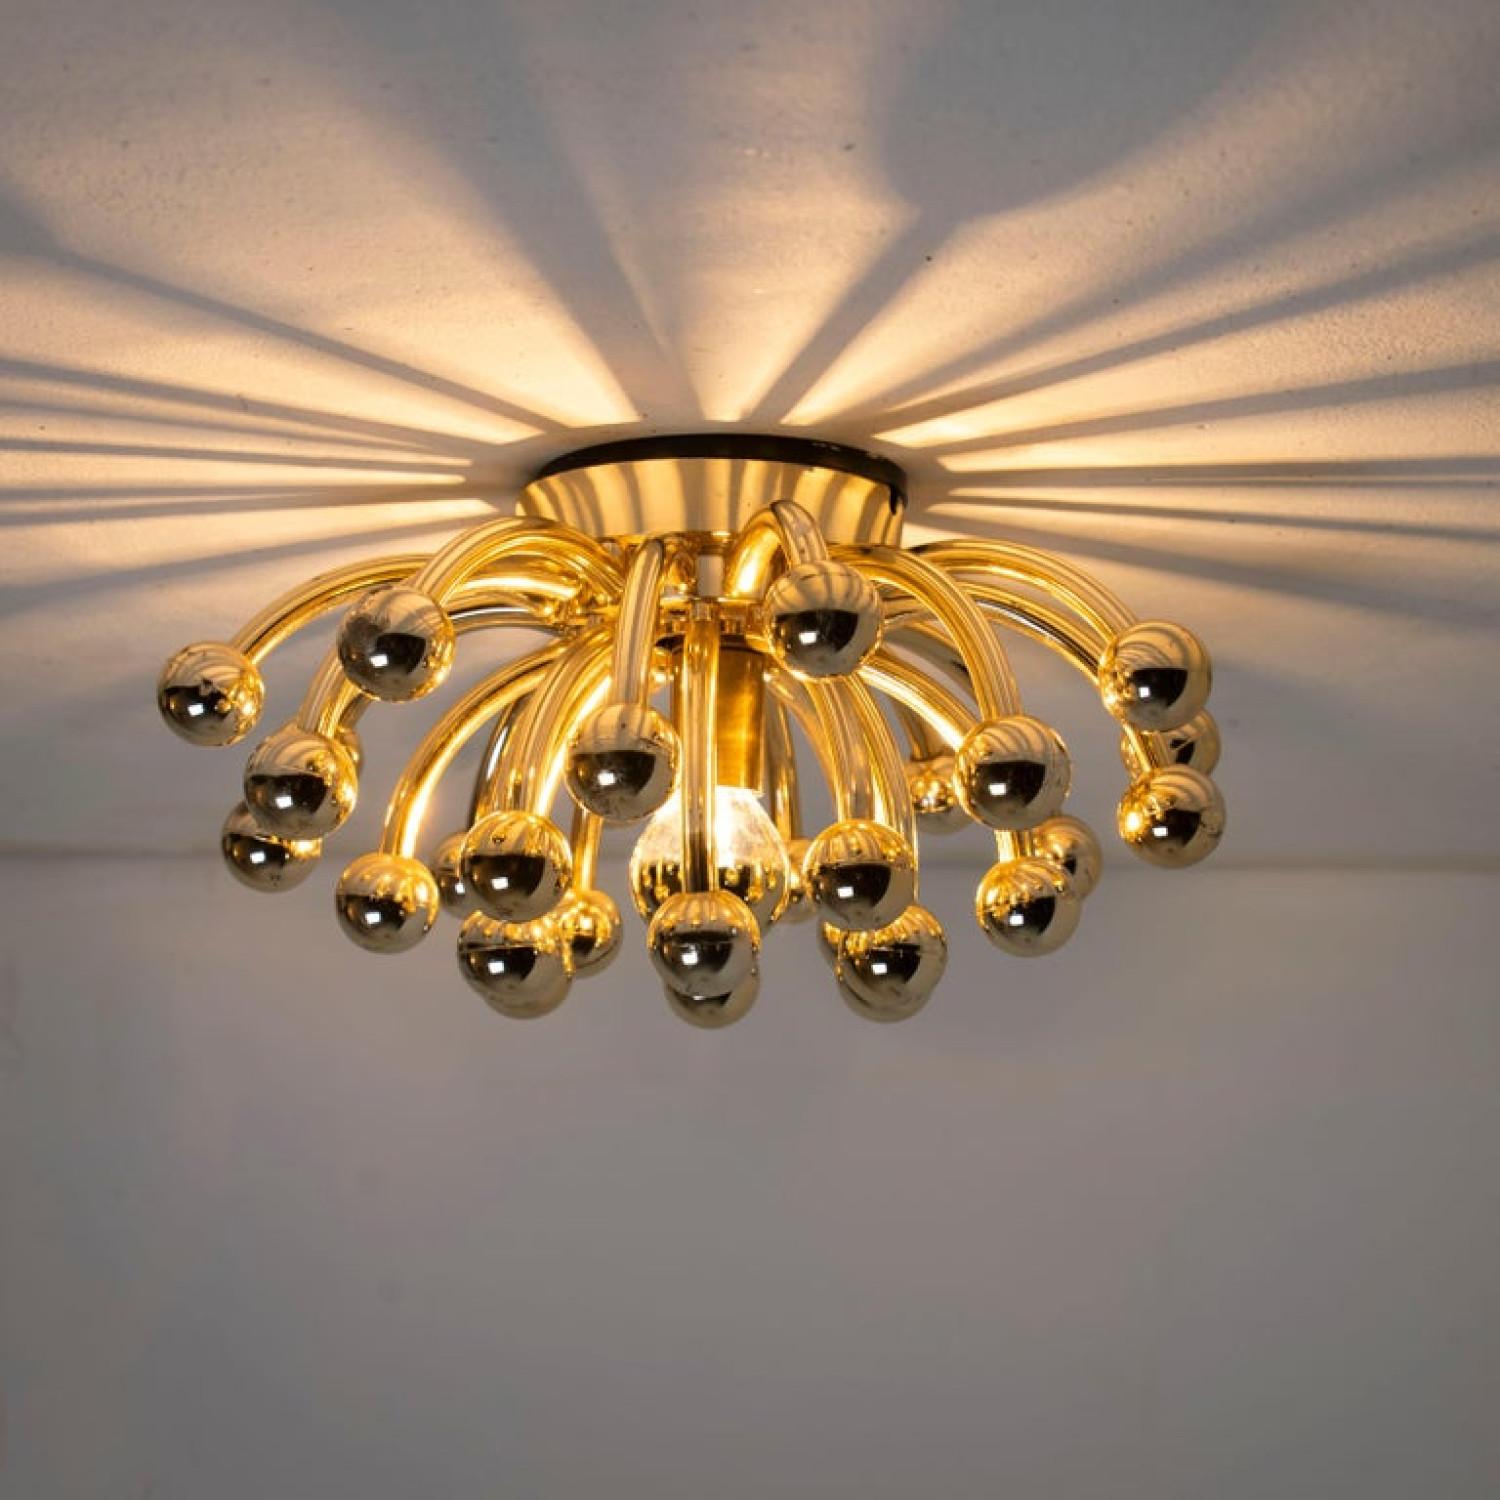 1 of the 4 Valenti Luce Pistillino Wall Lights, Italy, 1970 For Sale 5